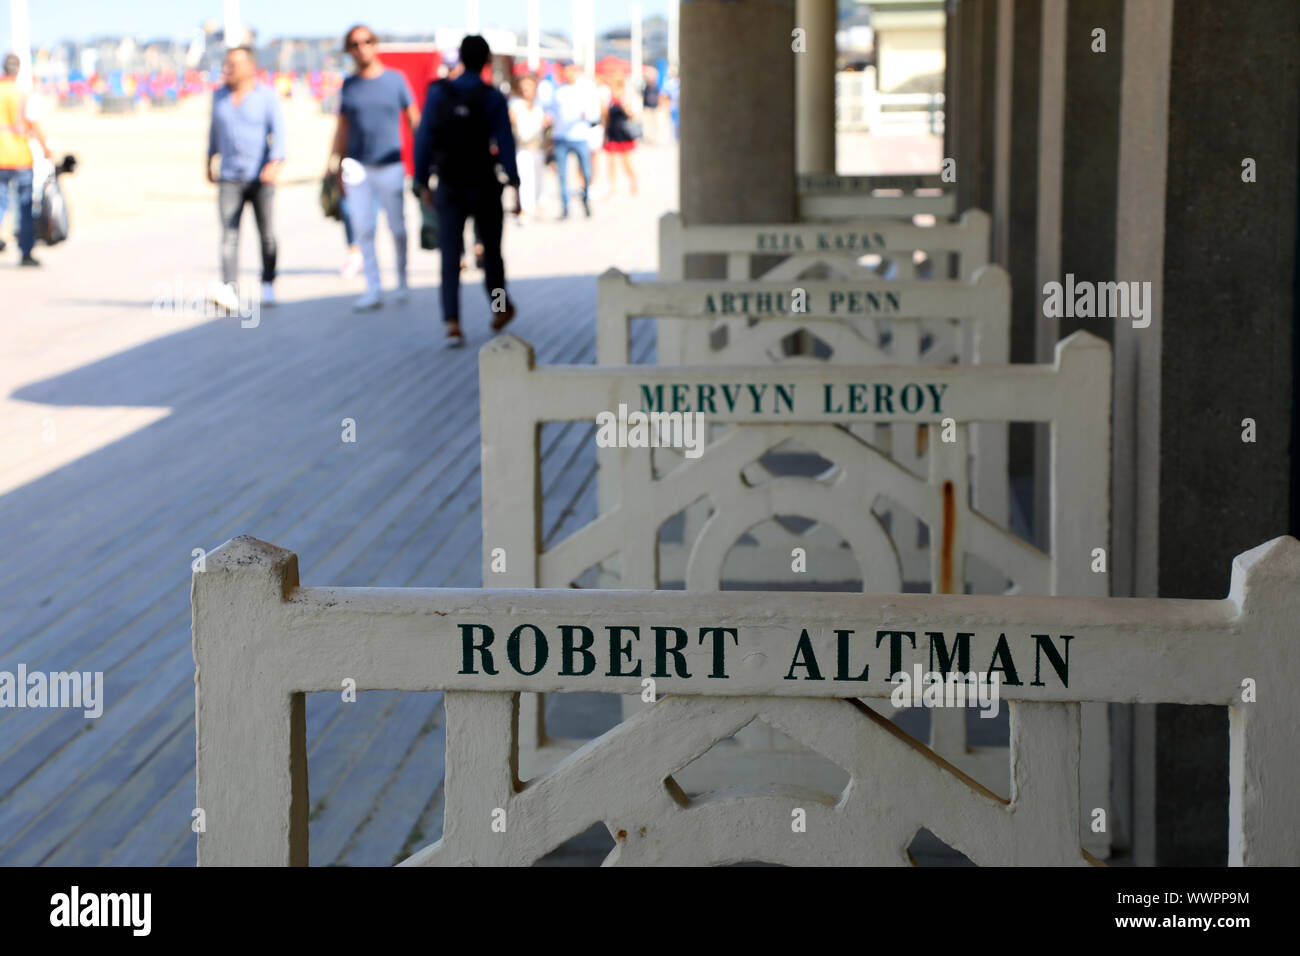 Deauville / France – September 14, 2019: Pedestrians walk along the Promenade des Planches, where names of film stars who have visited are painted out Stock Photo